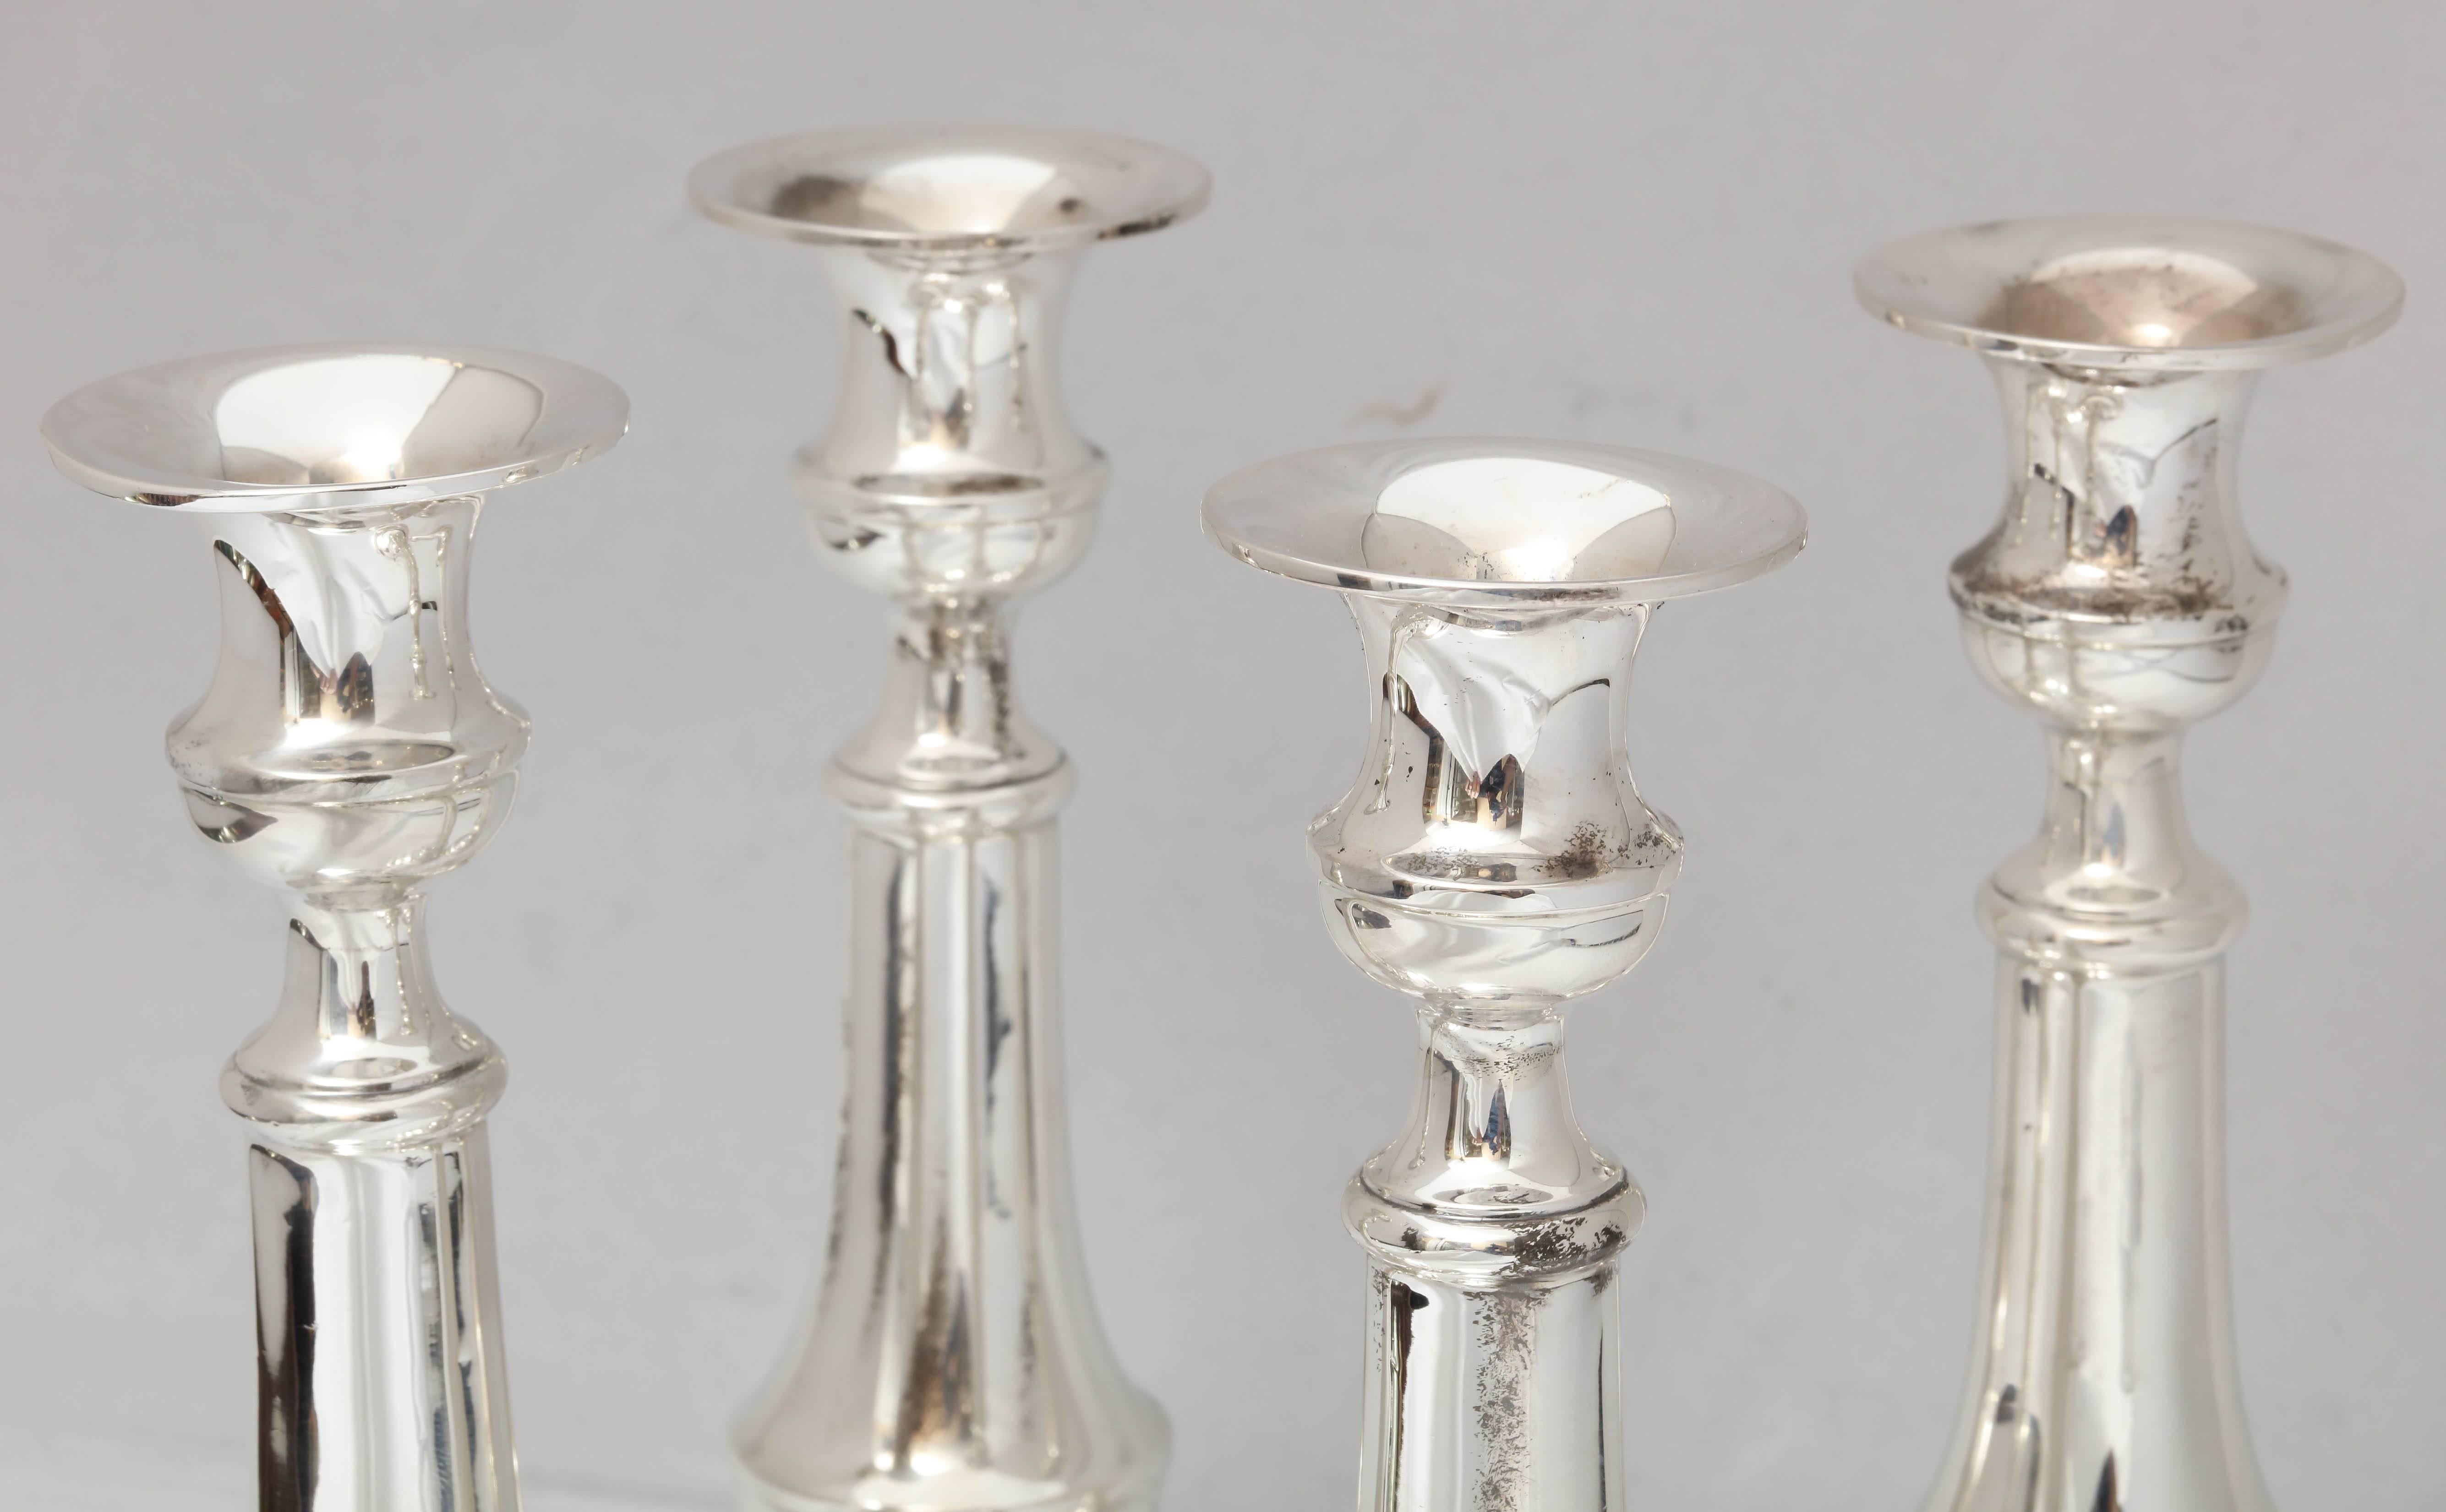 Suite of Four Edwardian Sterling Silver Candlesticks 1